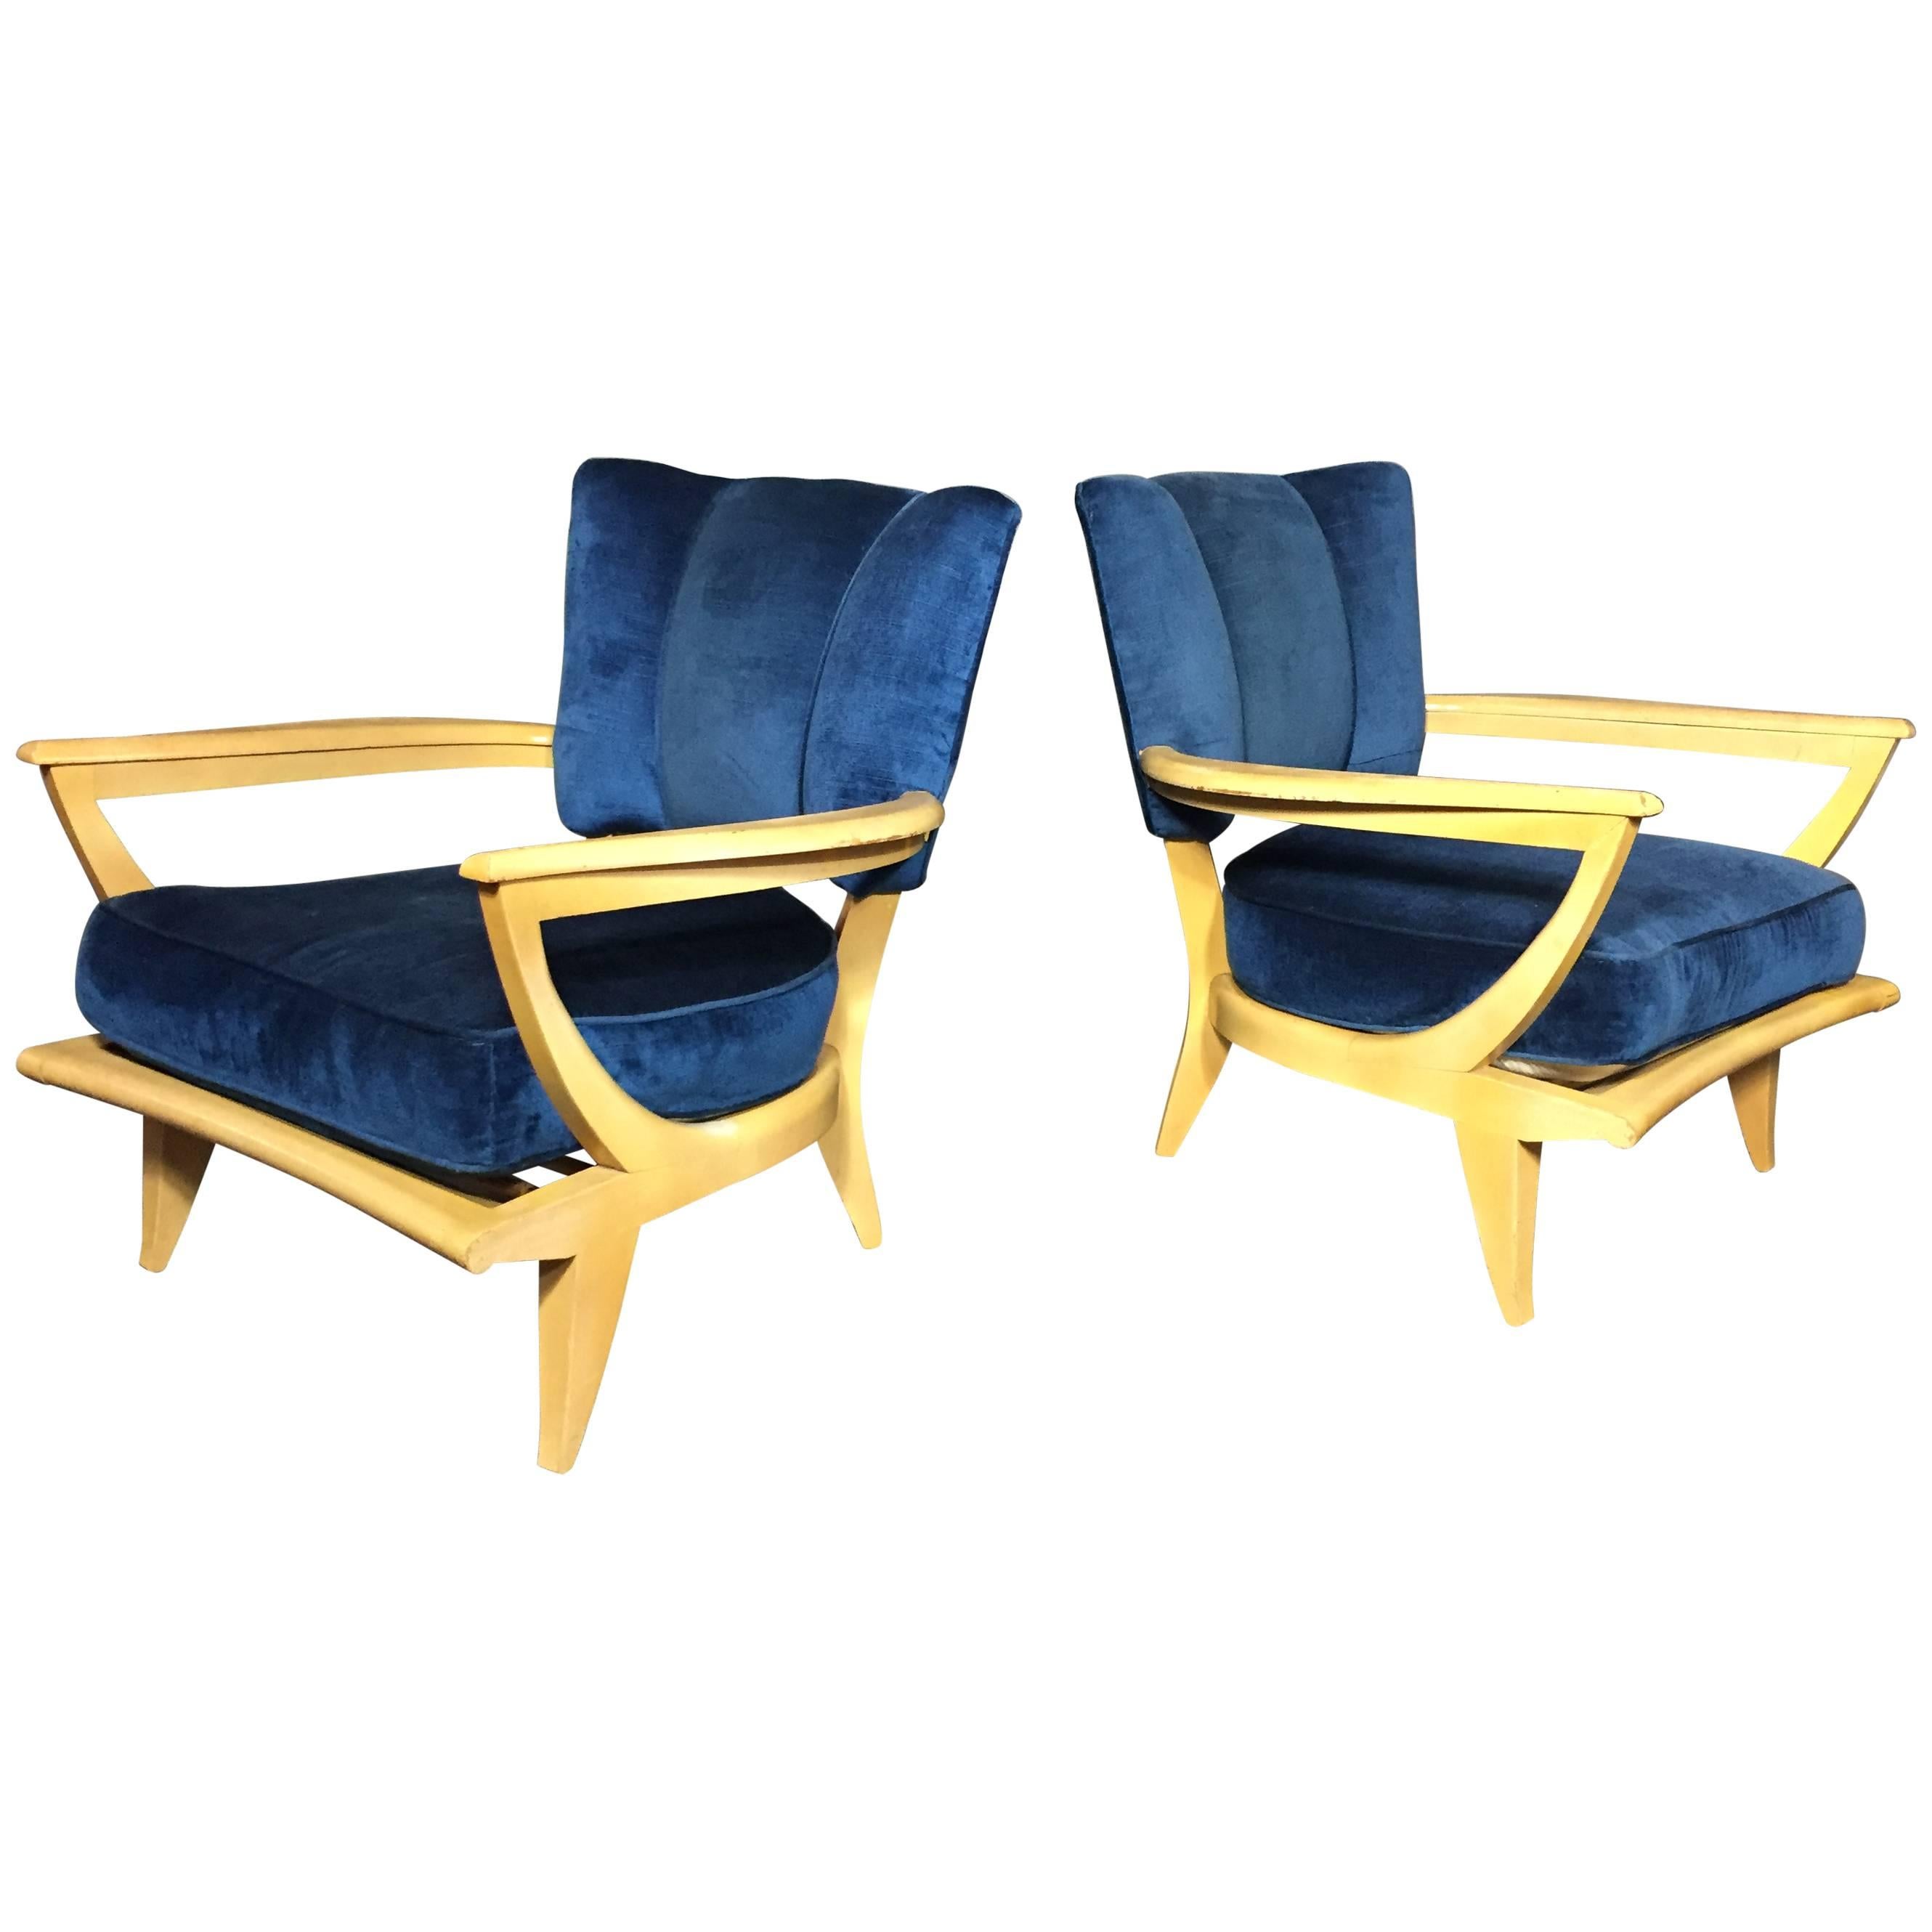 Pair of French Lacquered Mahogany and Velvet Lounge Chairs, 1950s